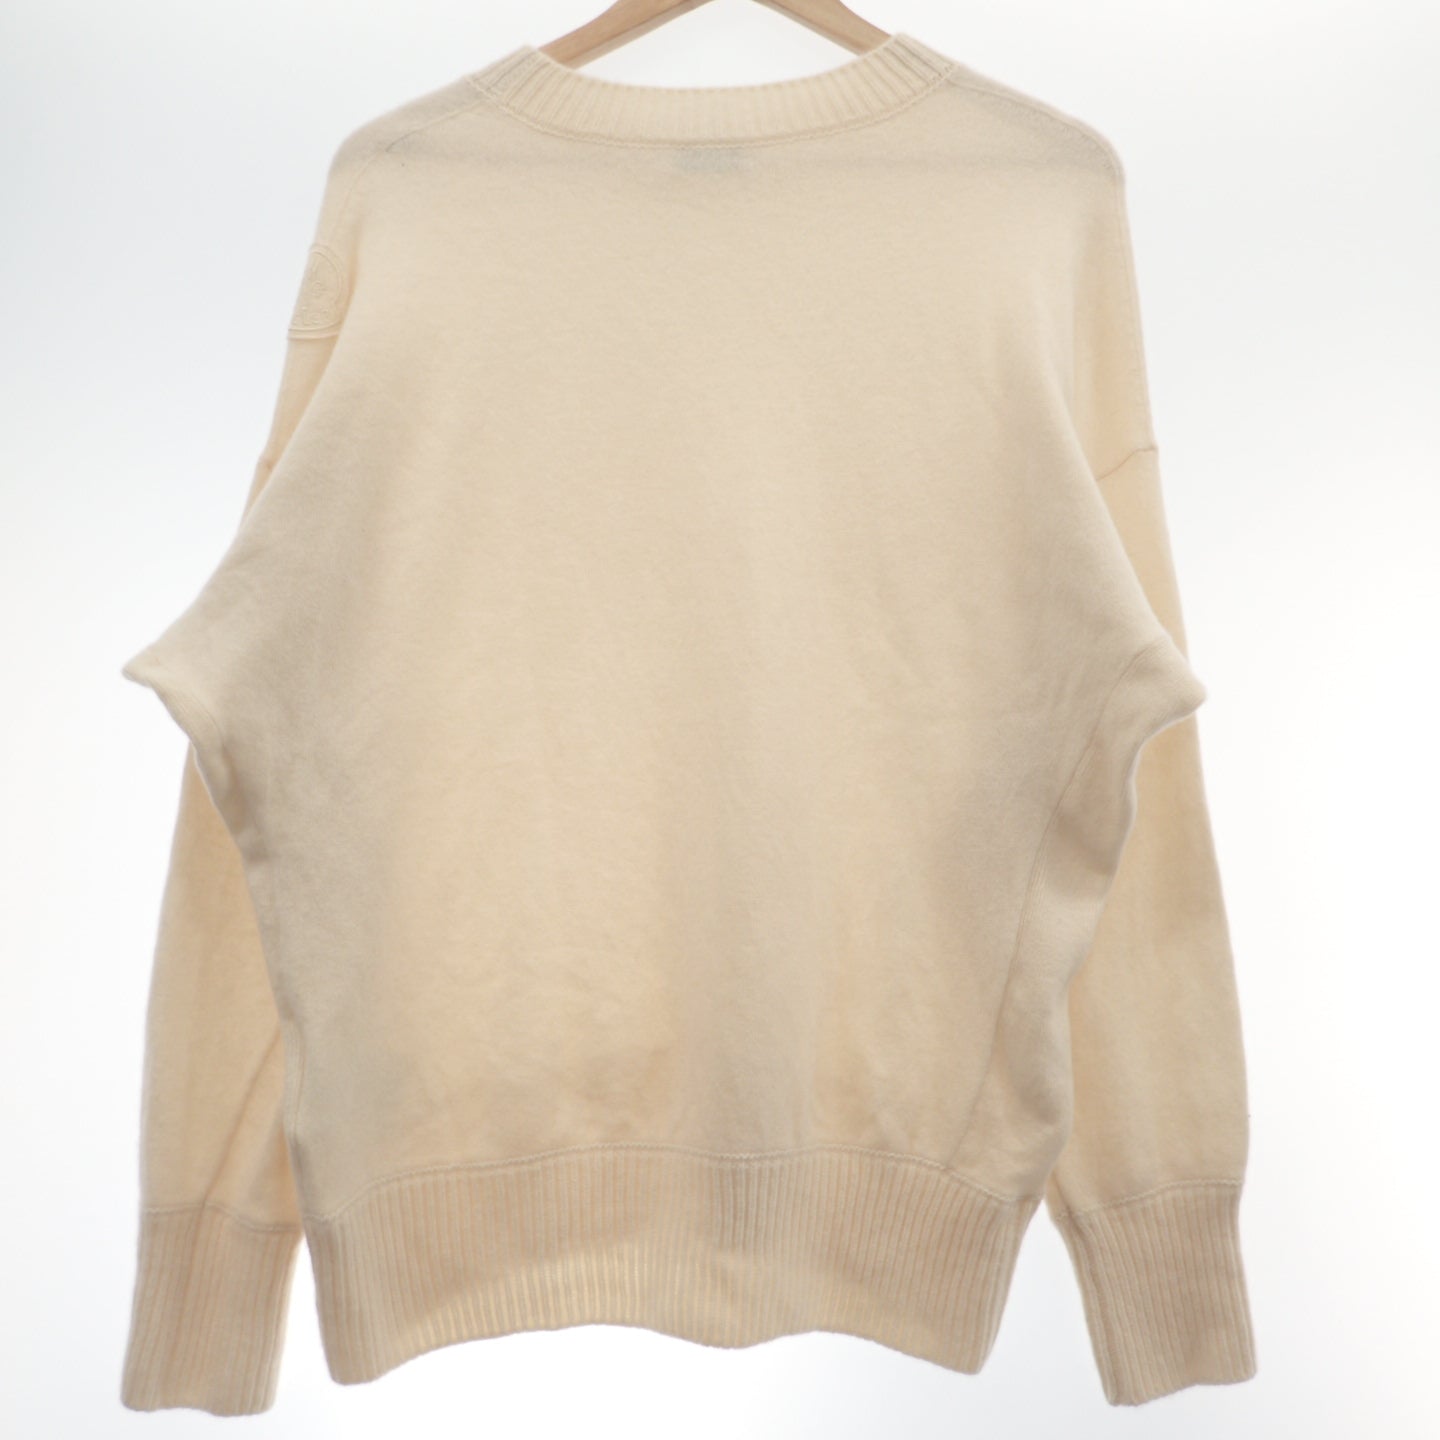 Moncler Knit Sweater MAGLIONE TRICOT GIROCOLLO Men's Ivory S MONCLER [AFB21] [Used] 